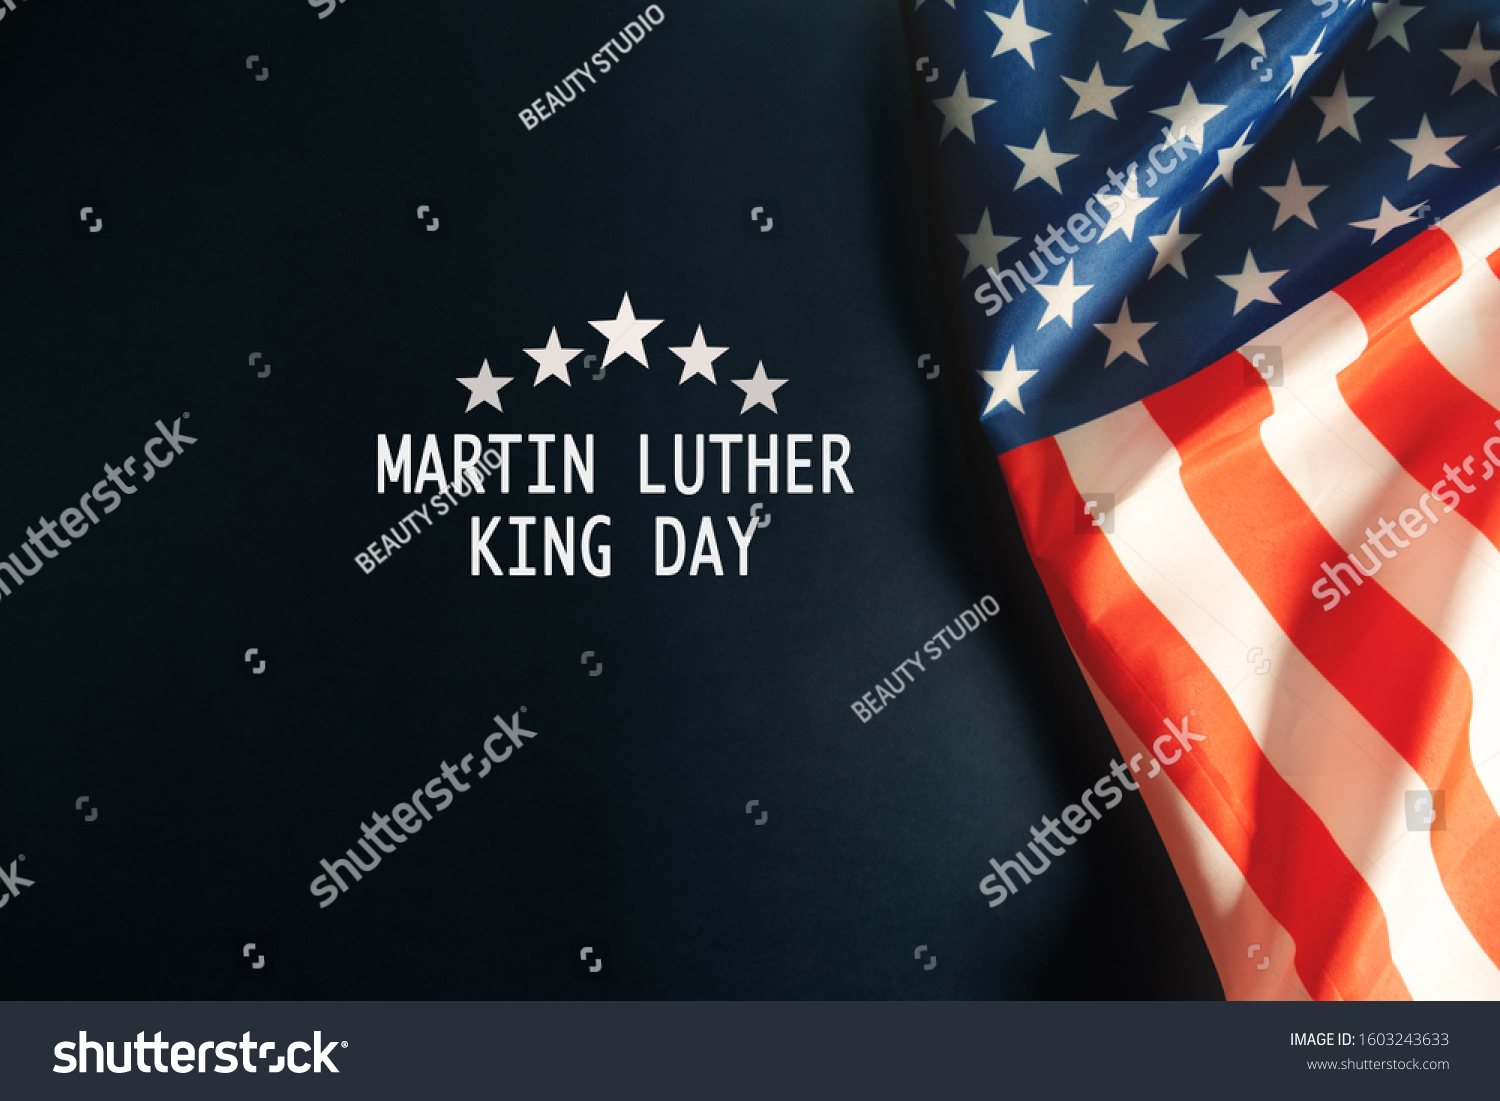 Martin Luther King Day Anniversary - American flag abstract background #1603243633